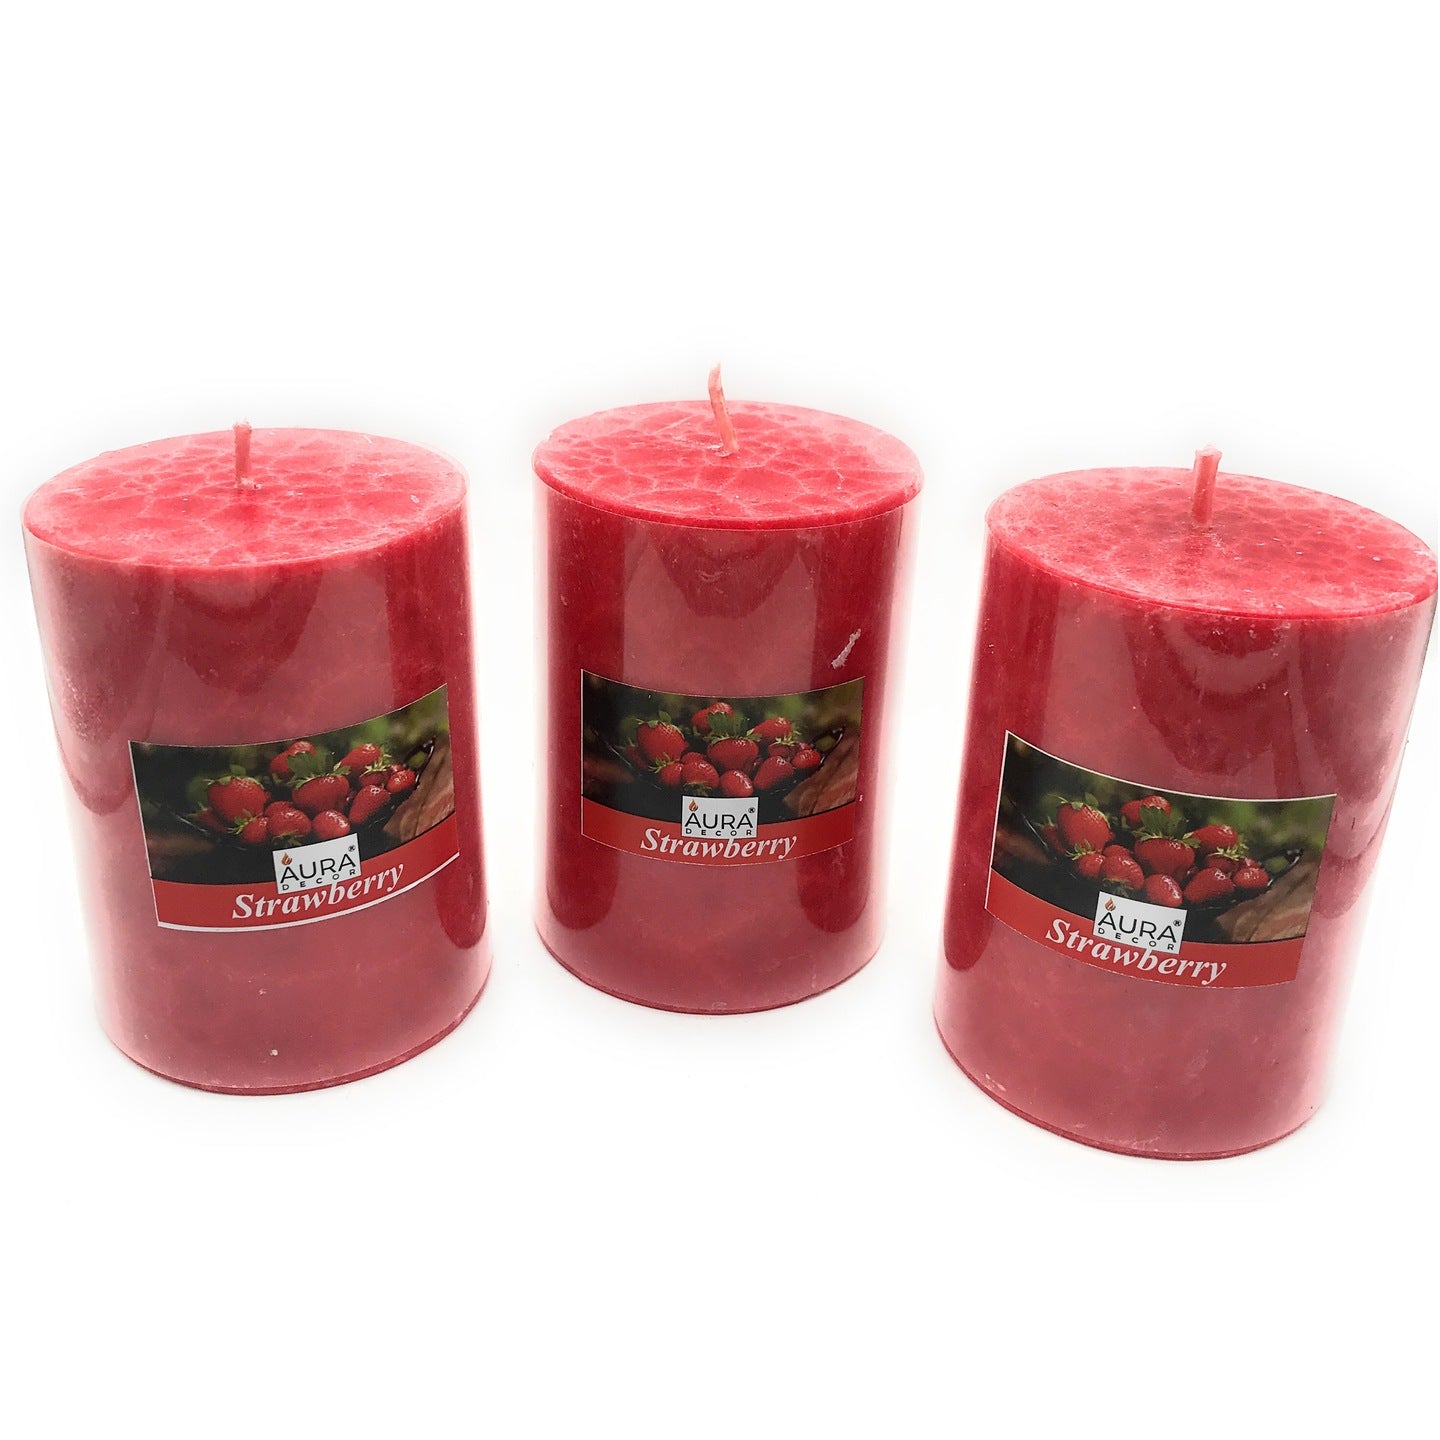 AuraDecor Pack of 3 Strawberry Fragrance Marble Finish Pillar Candle ( 3*4 Inches ) - auradecor.co.in